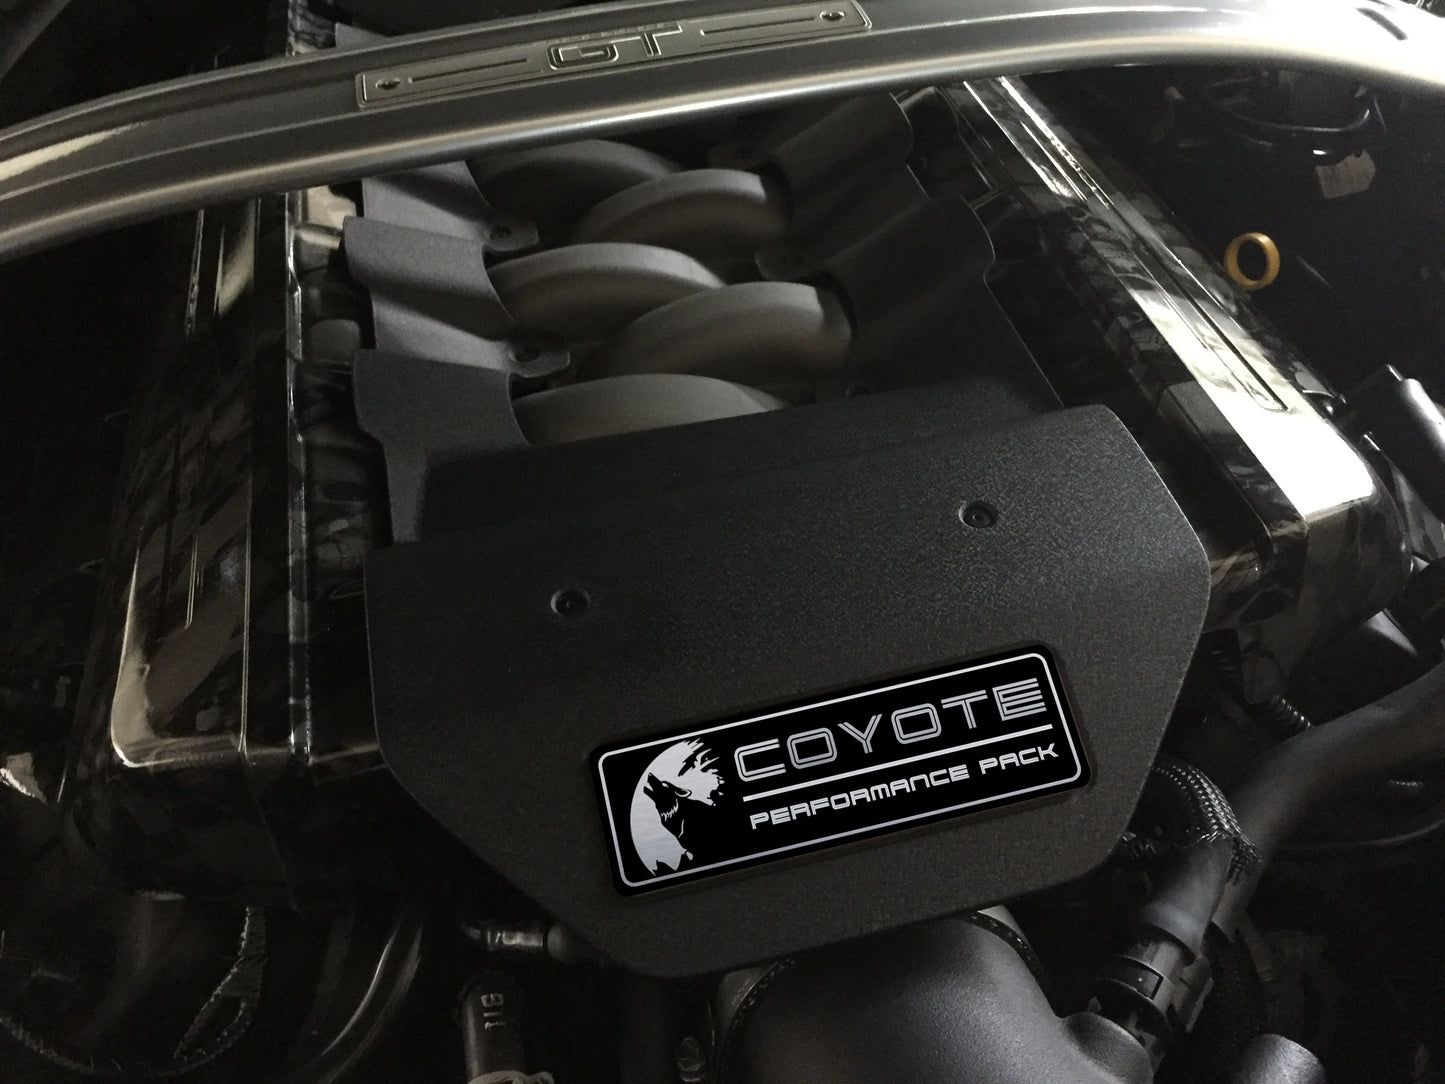 Aluminum Engine Cover Plate [S7] Coyote Performance Pack (2015-2017 Mustang)